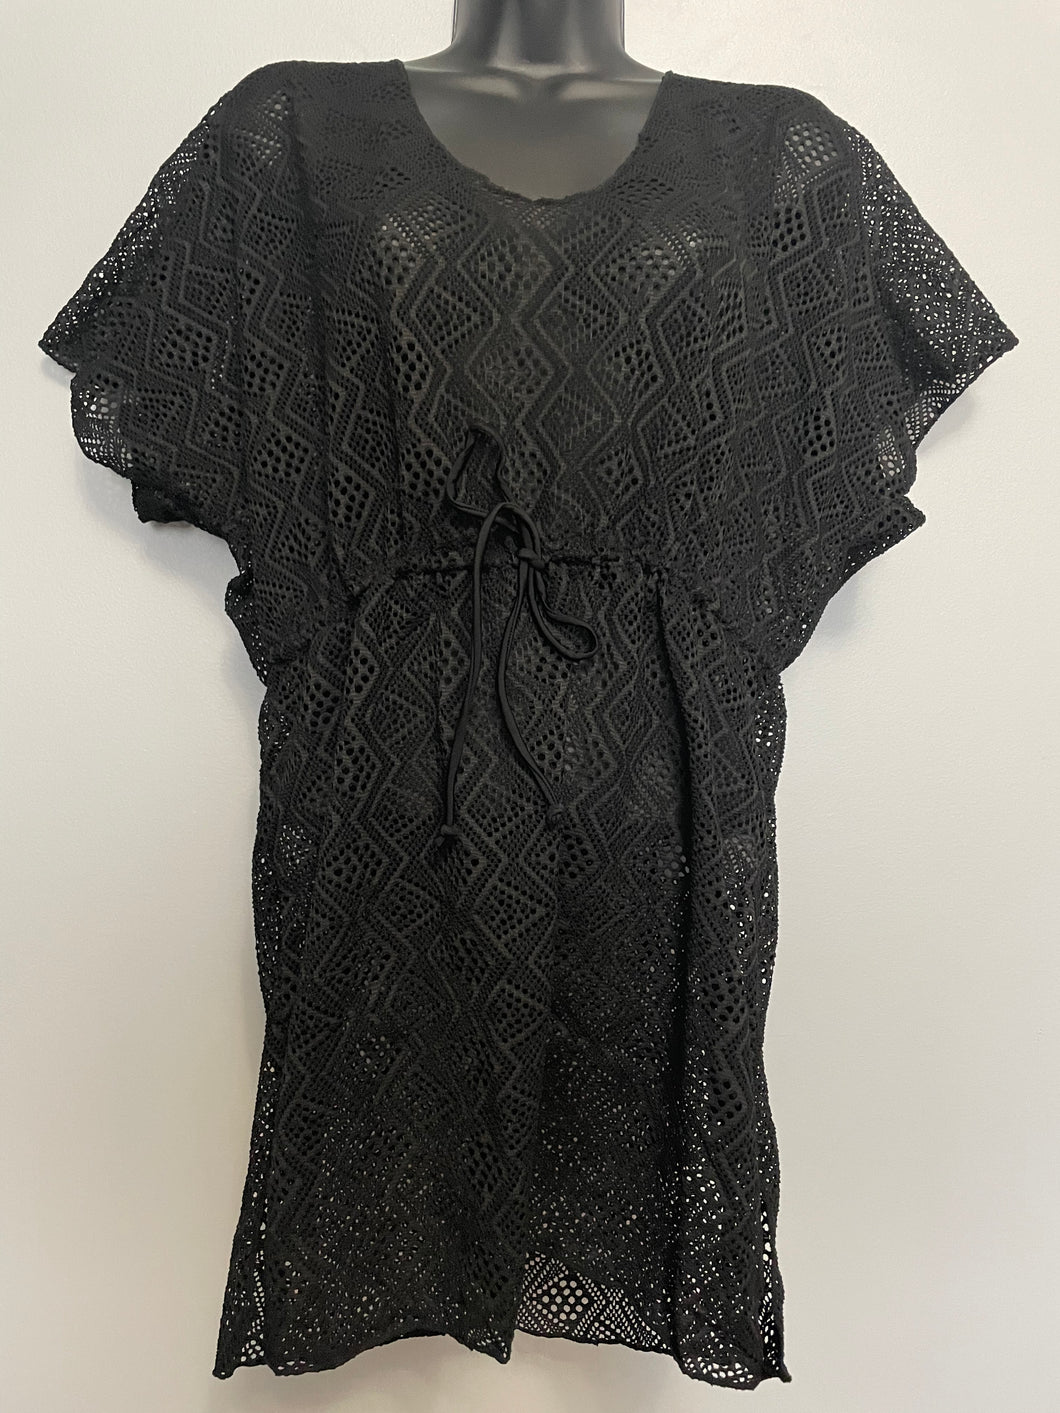 Sheer Black V-Neck Cover Up with Short Sleeves with Drawstring Waist S-L